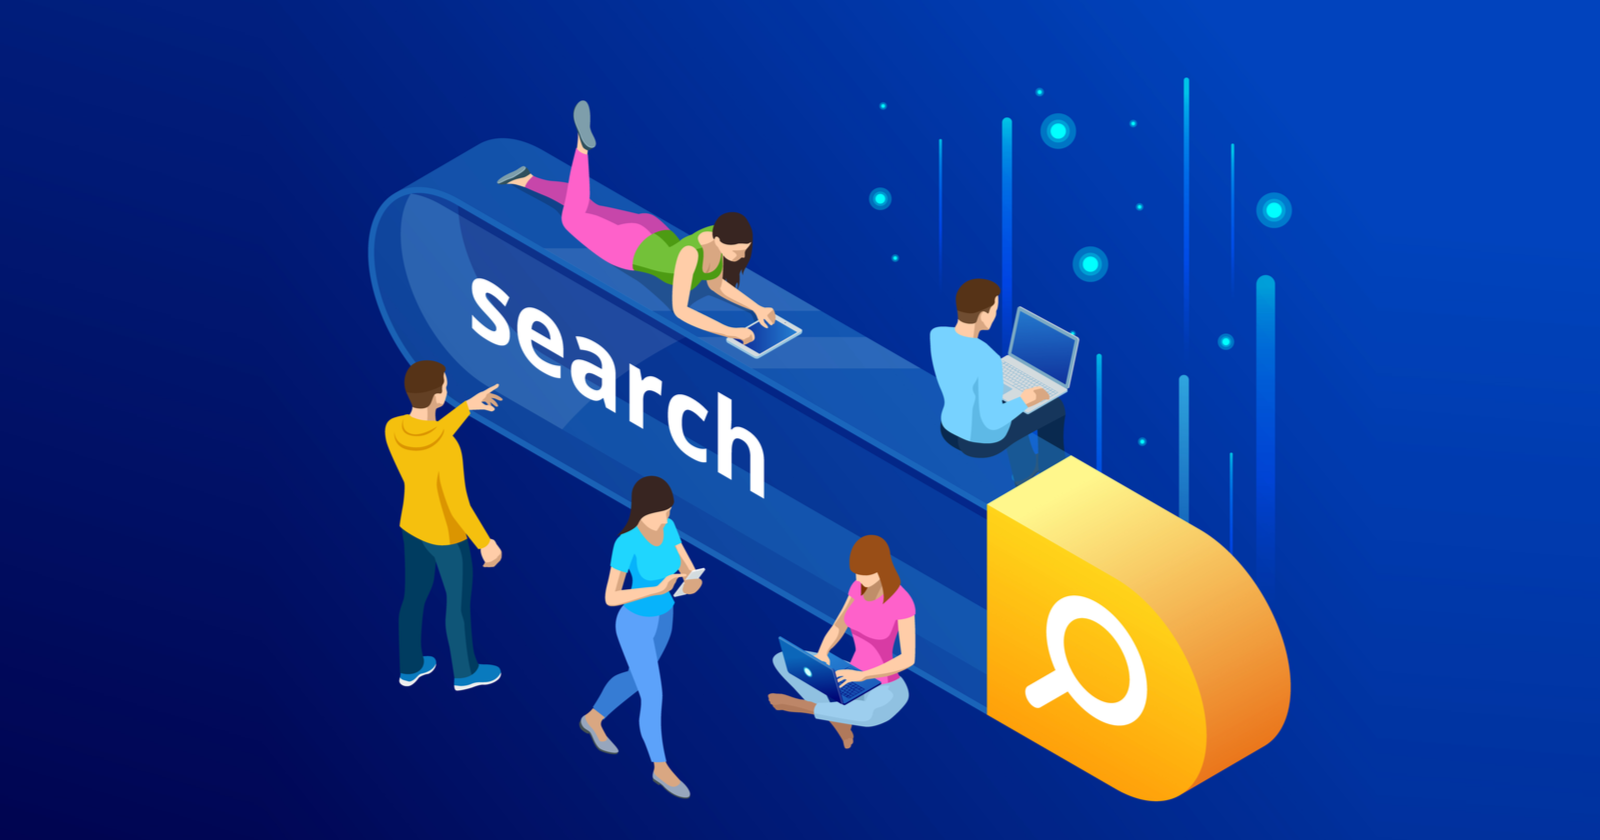 Site Search Keyword Suggestion Driven by Success Data